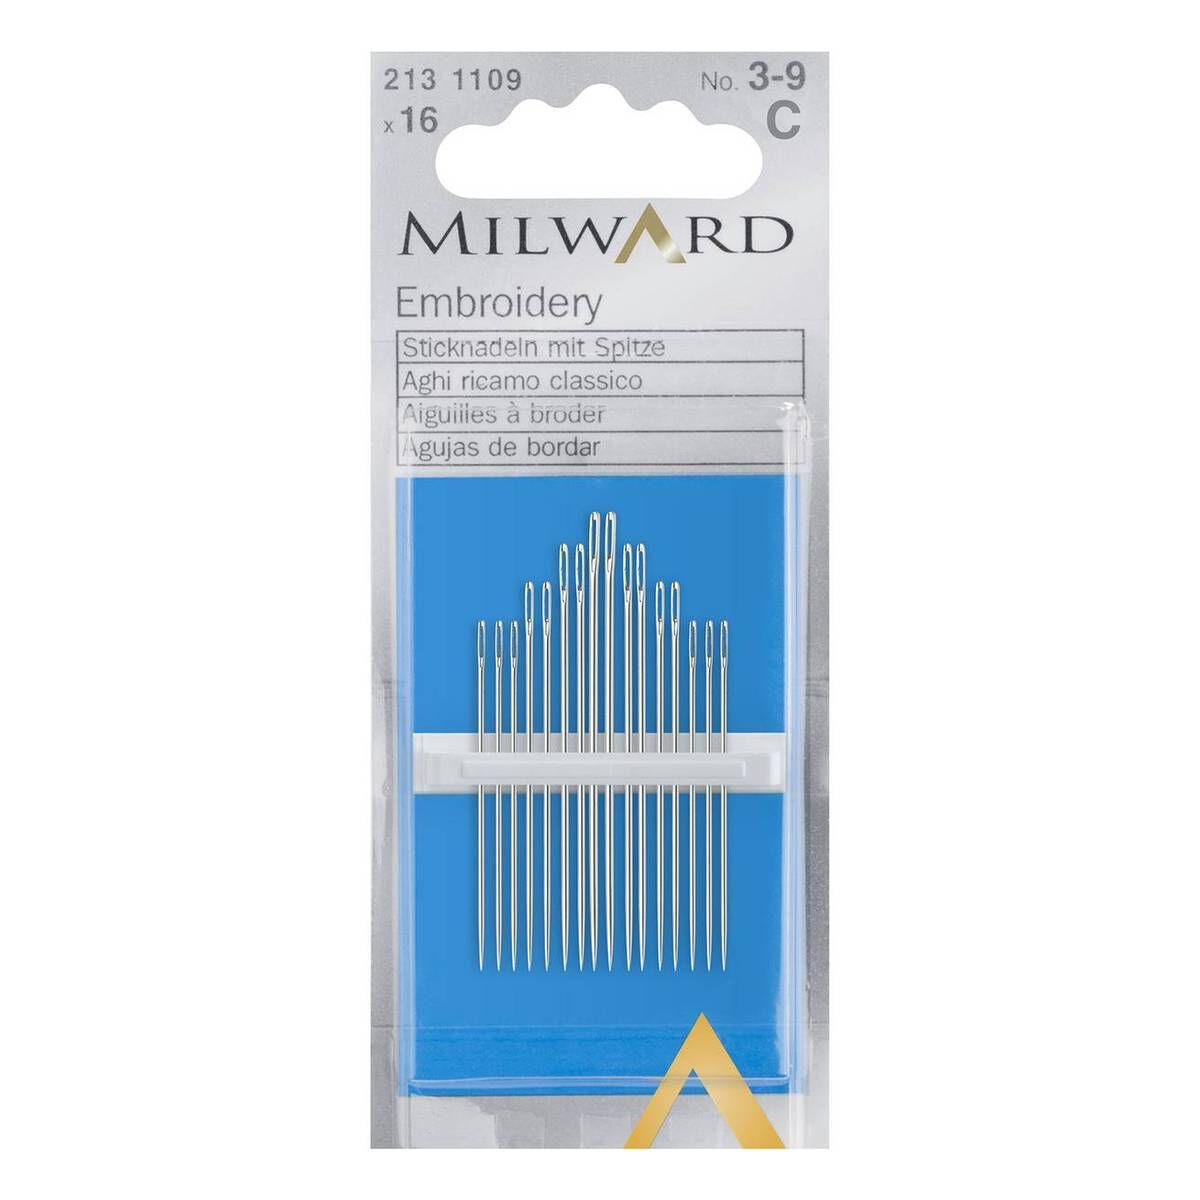 Milward Embroidery Needles No.3-9 - 16 Pack - Luca-S New